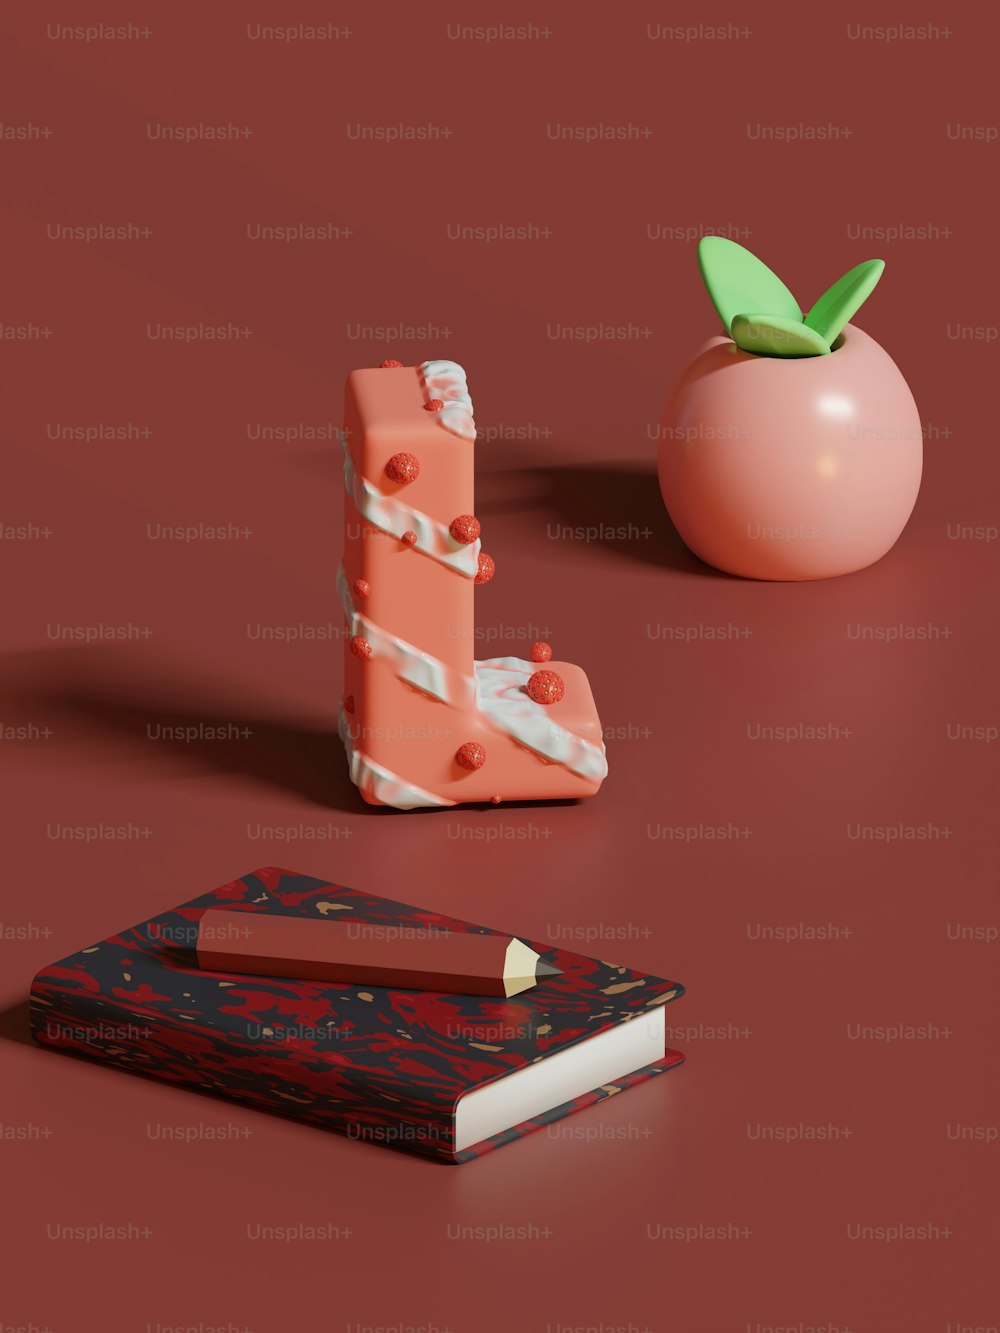 a piece of fruit sitting next to a book on a table